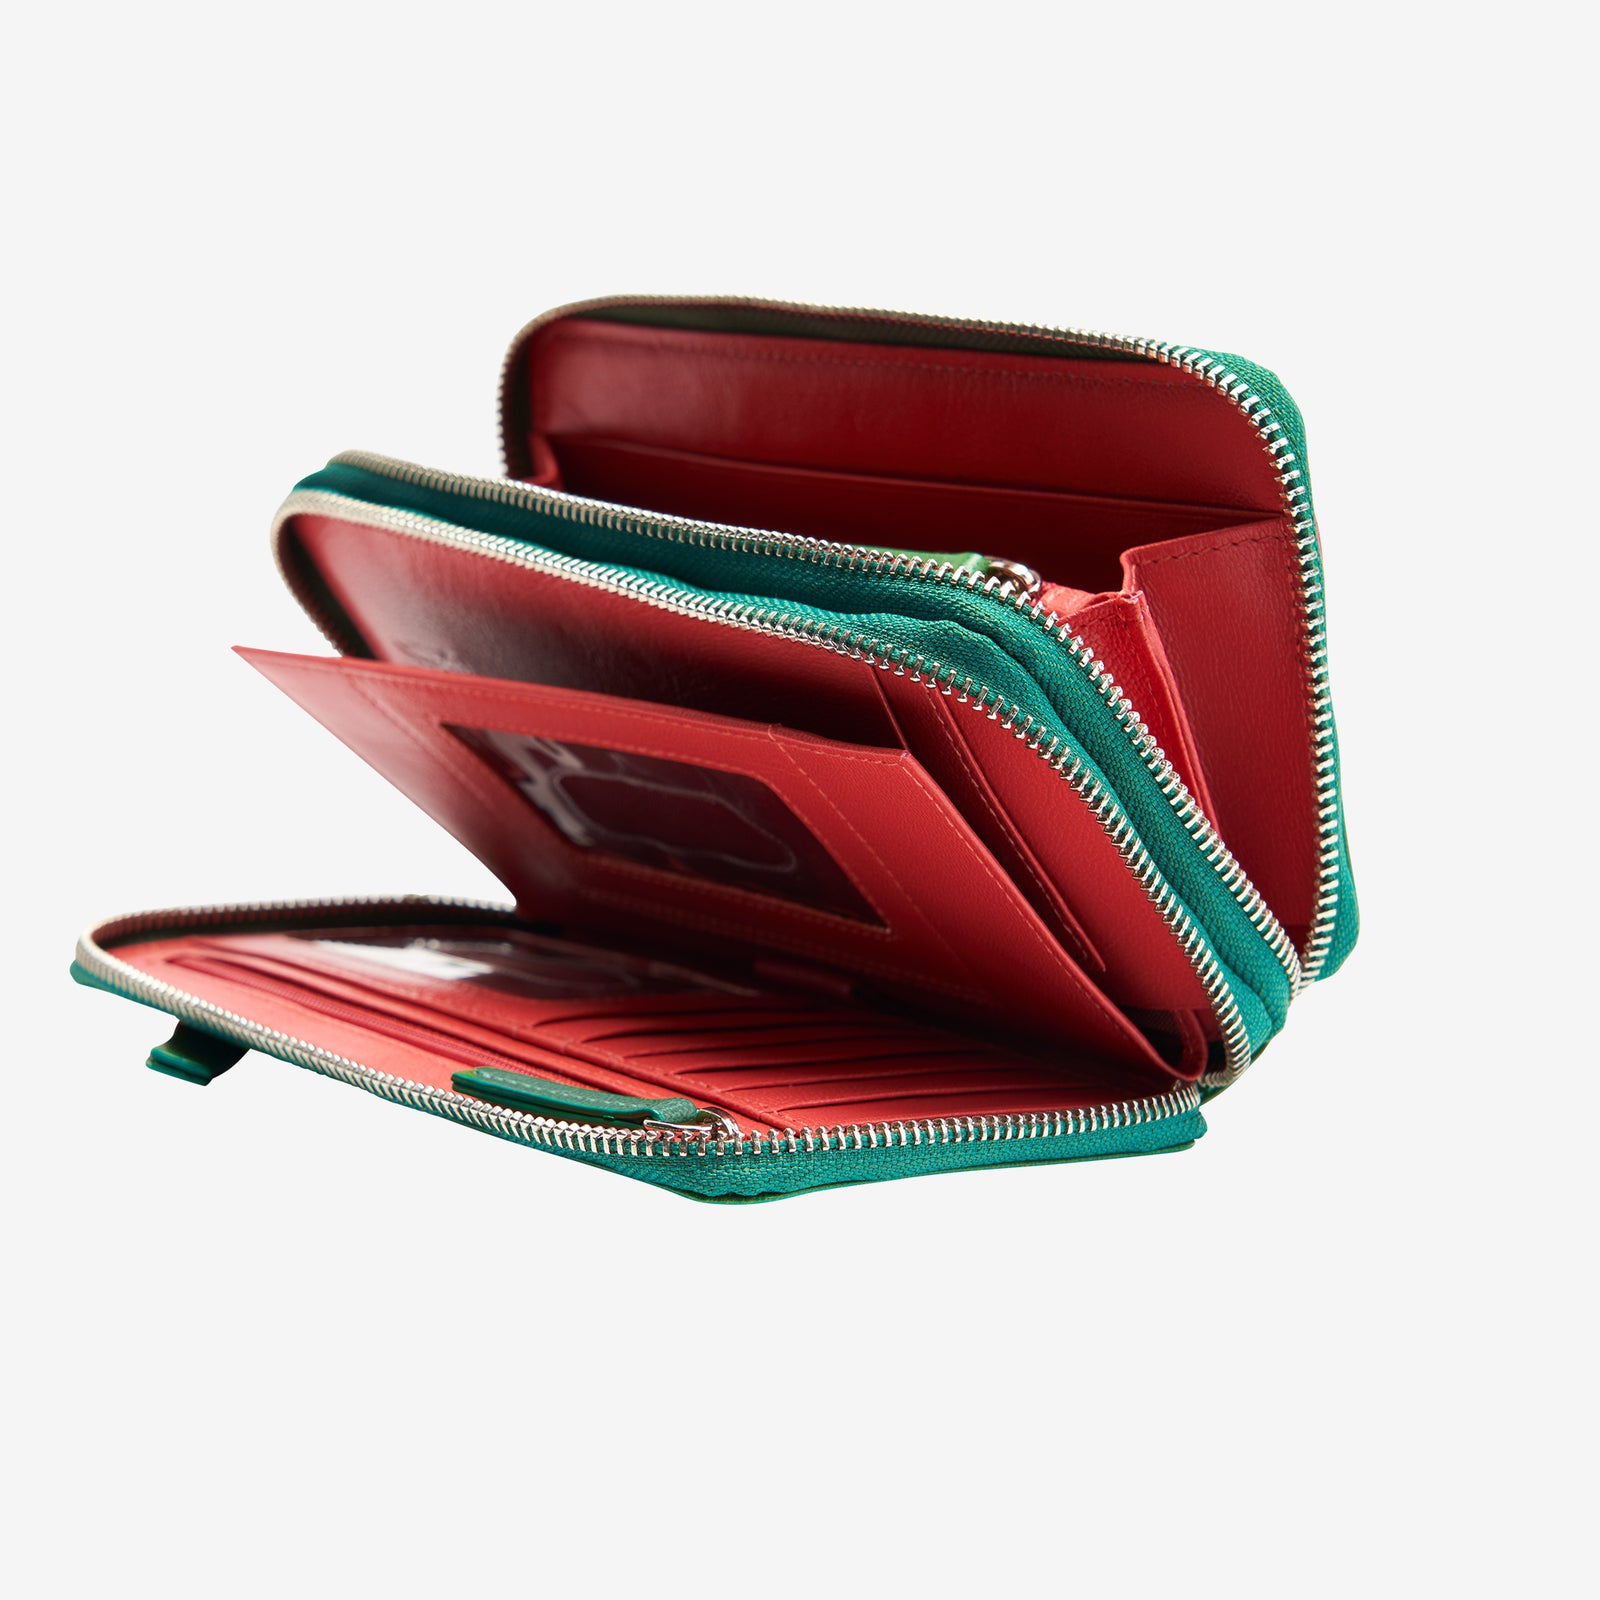 Double Zip Wallet with Side Pocket - Red